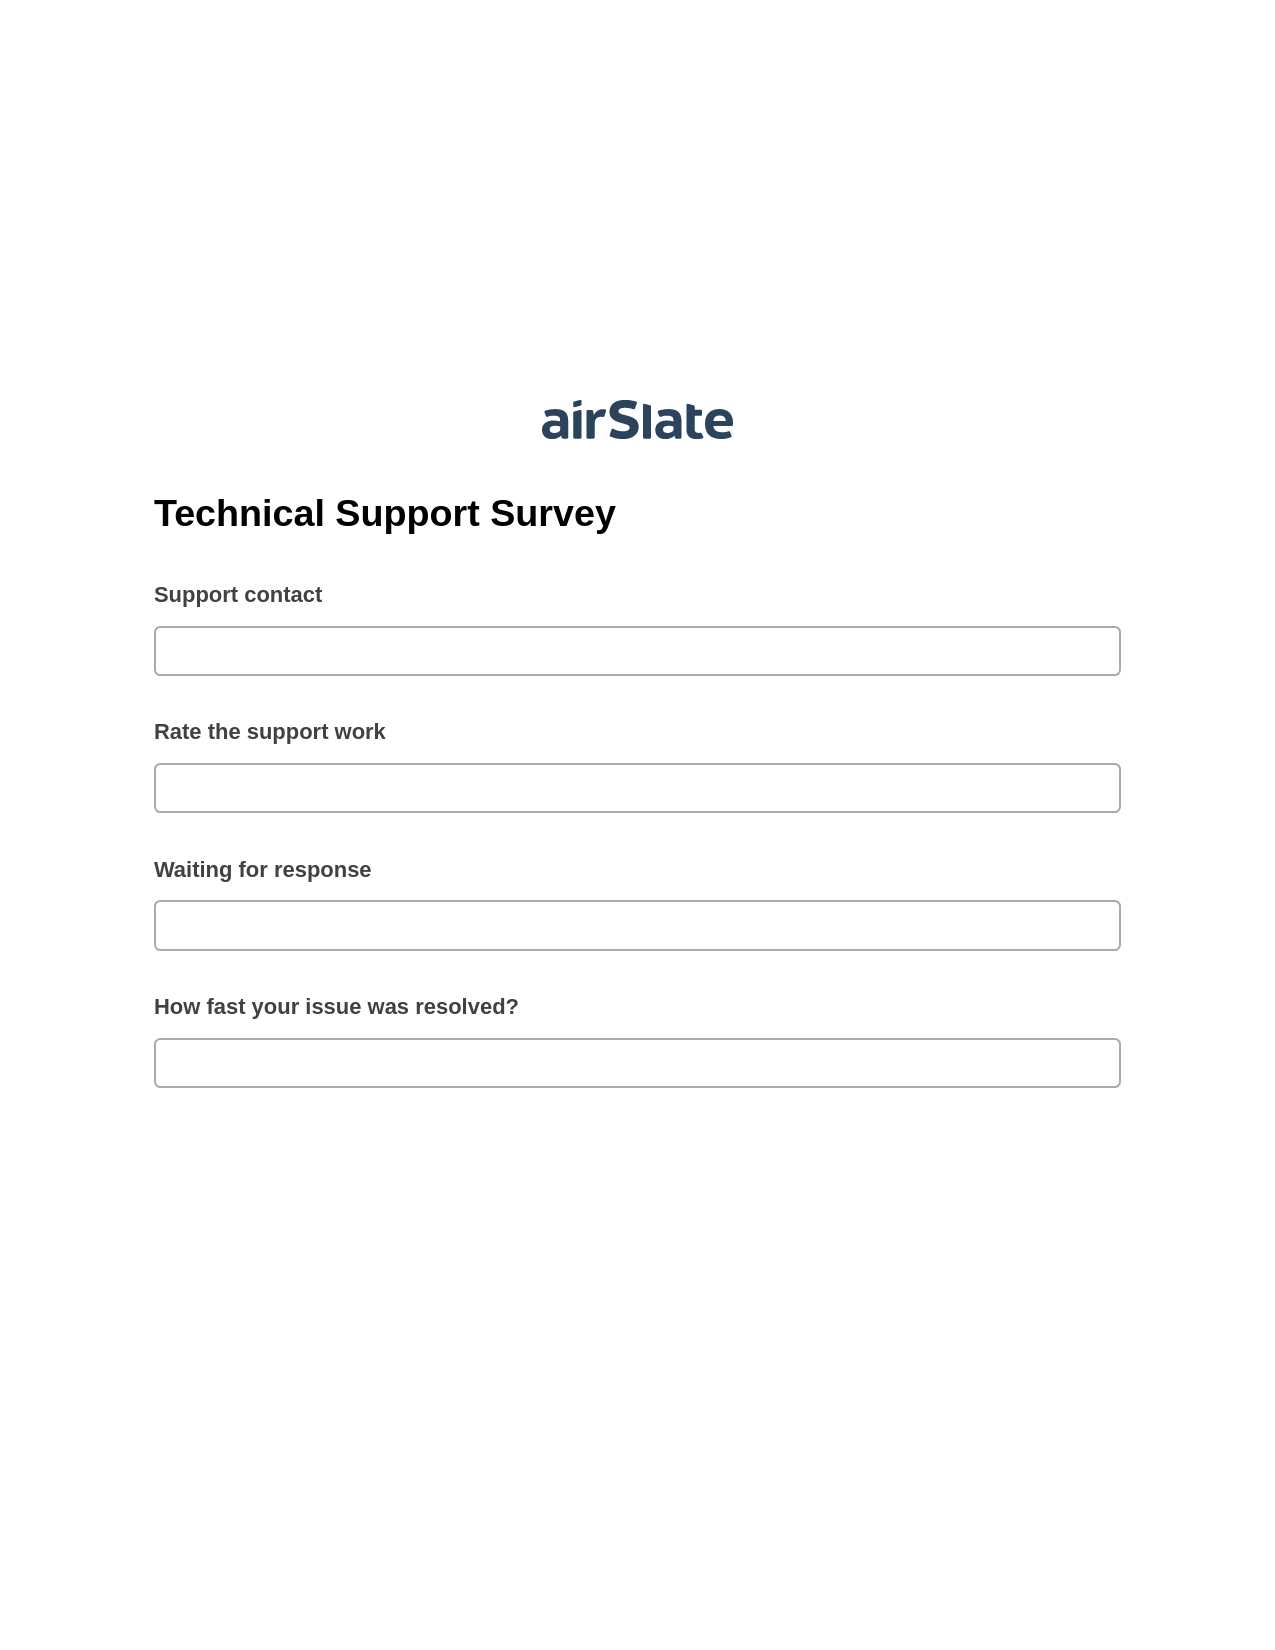 Technical Support Survey Pre-fill Dropdowns from Airtable, SendGrid send Campaign bot, Post-finish Document Bot